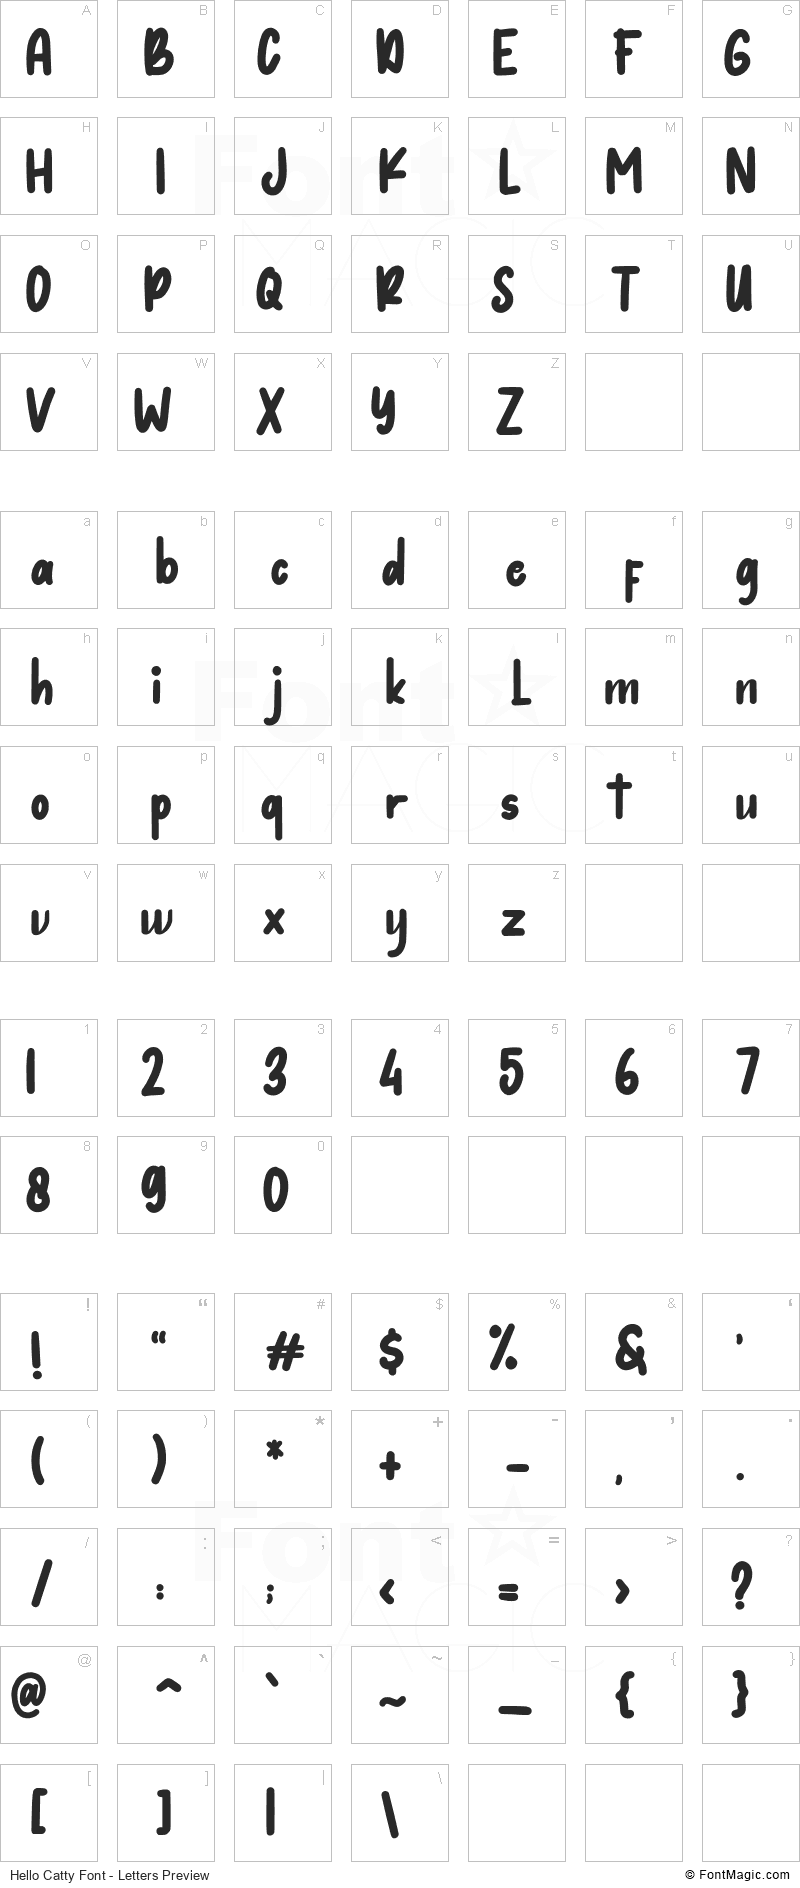 Hello Catty Font - All Latters Preview Chart